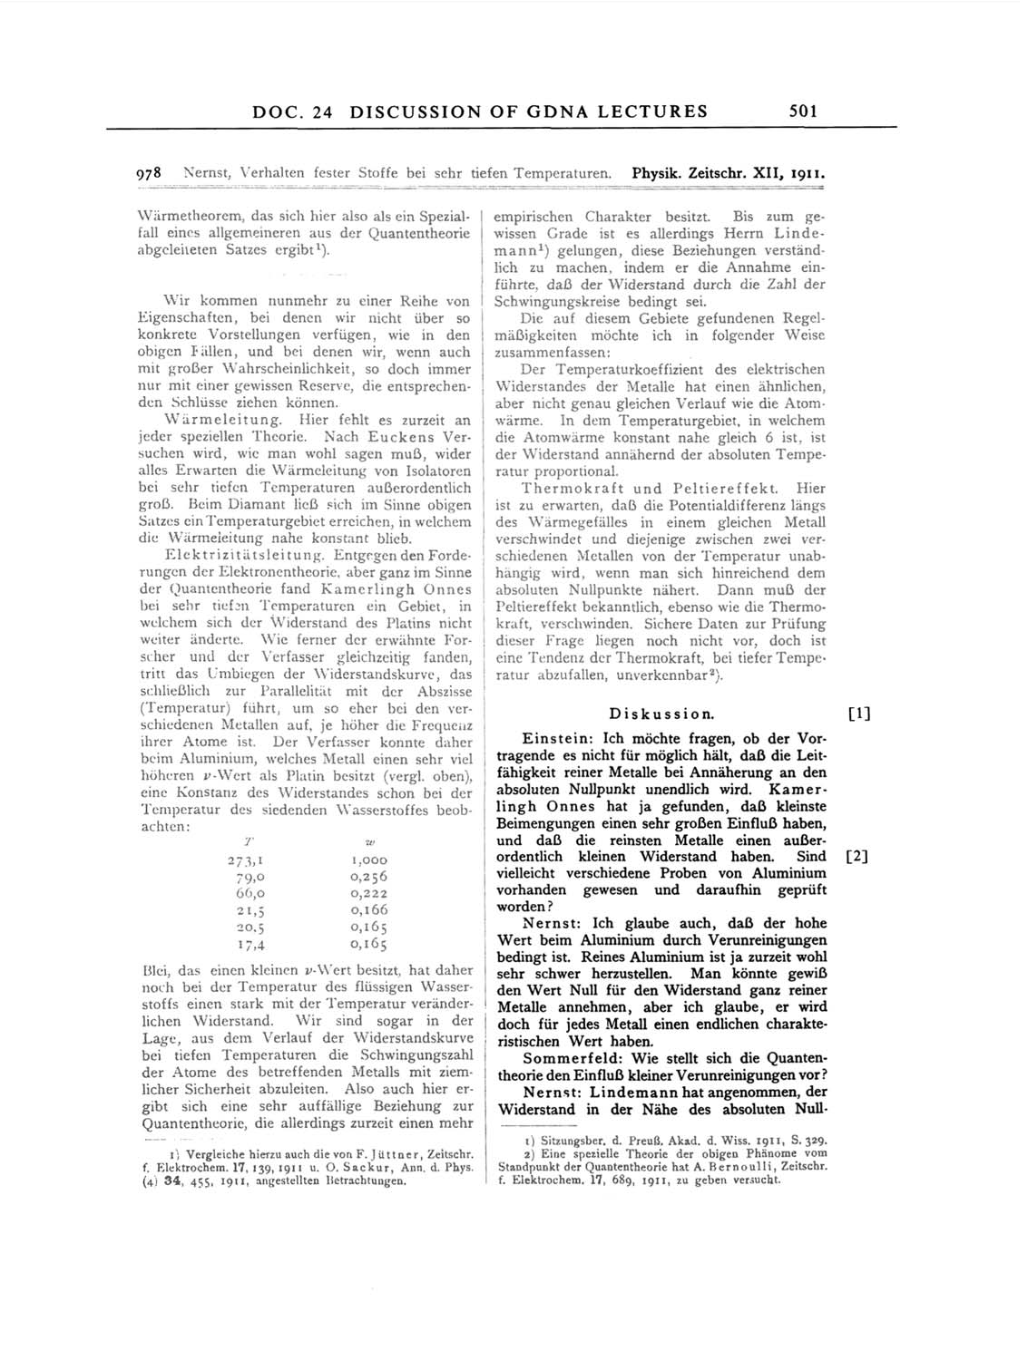 Volume 3: The Swiss Years: Writings 1909-1911 page 501